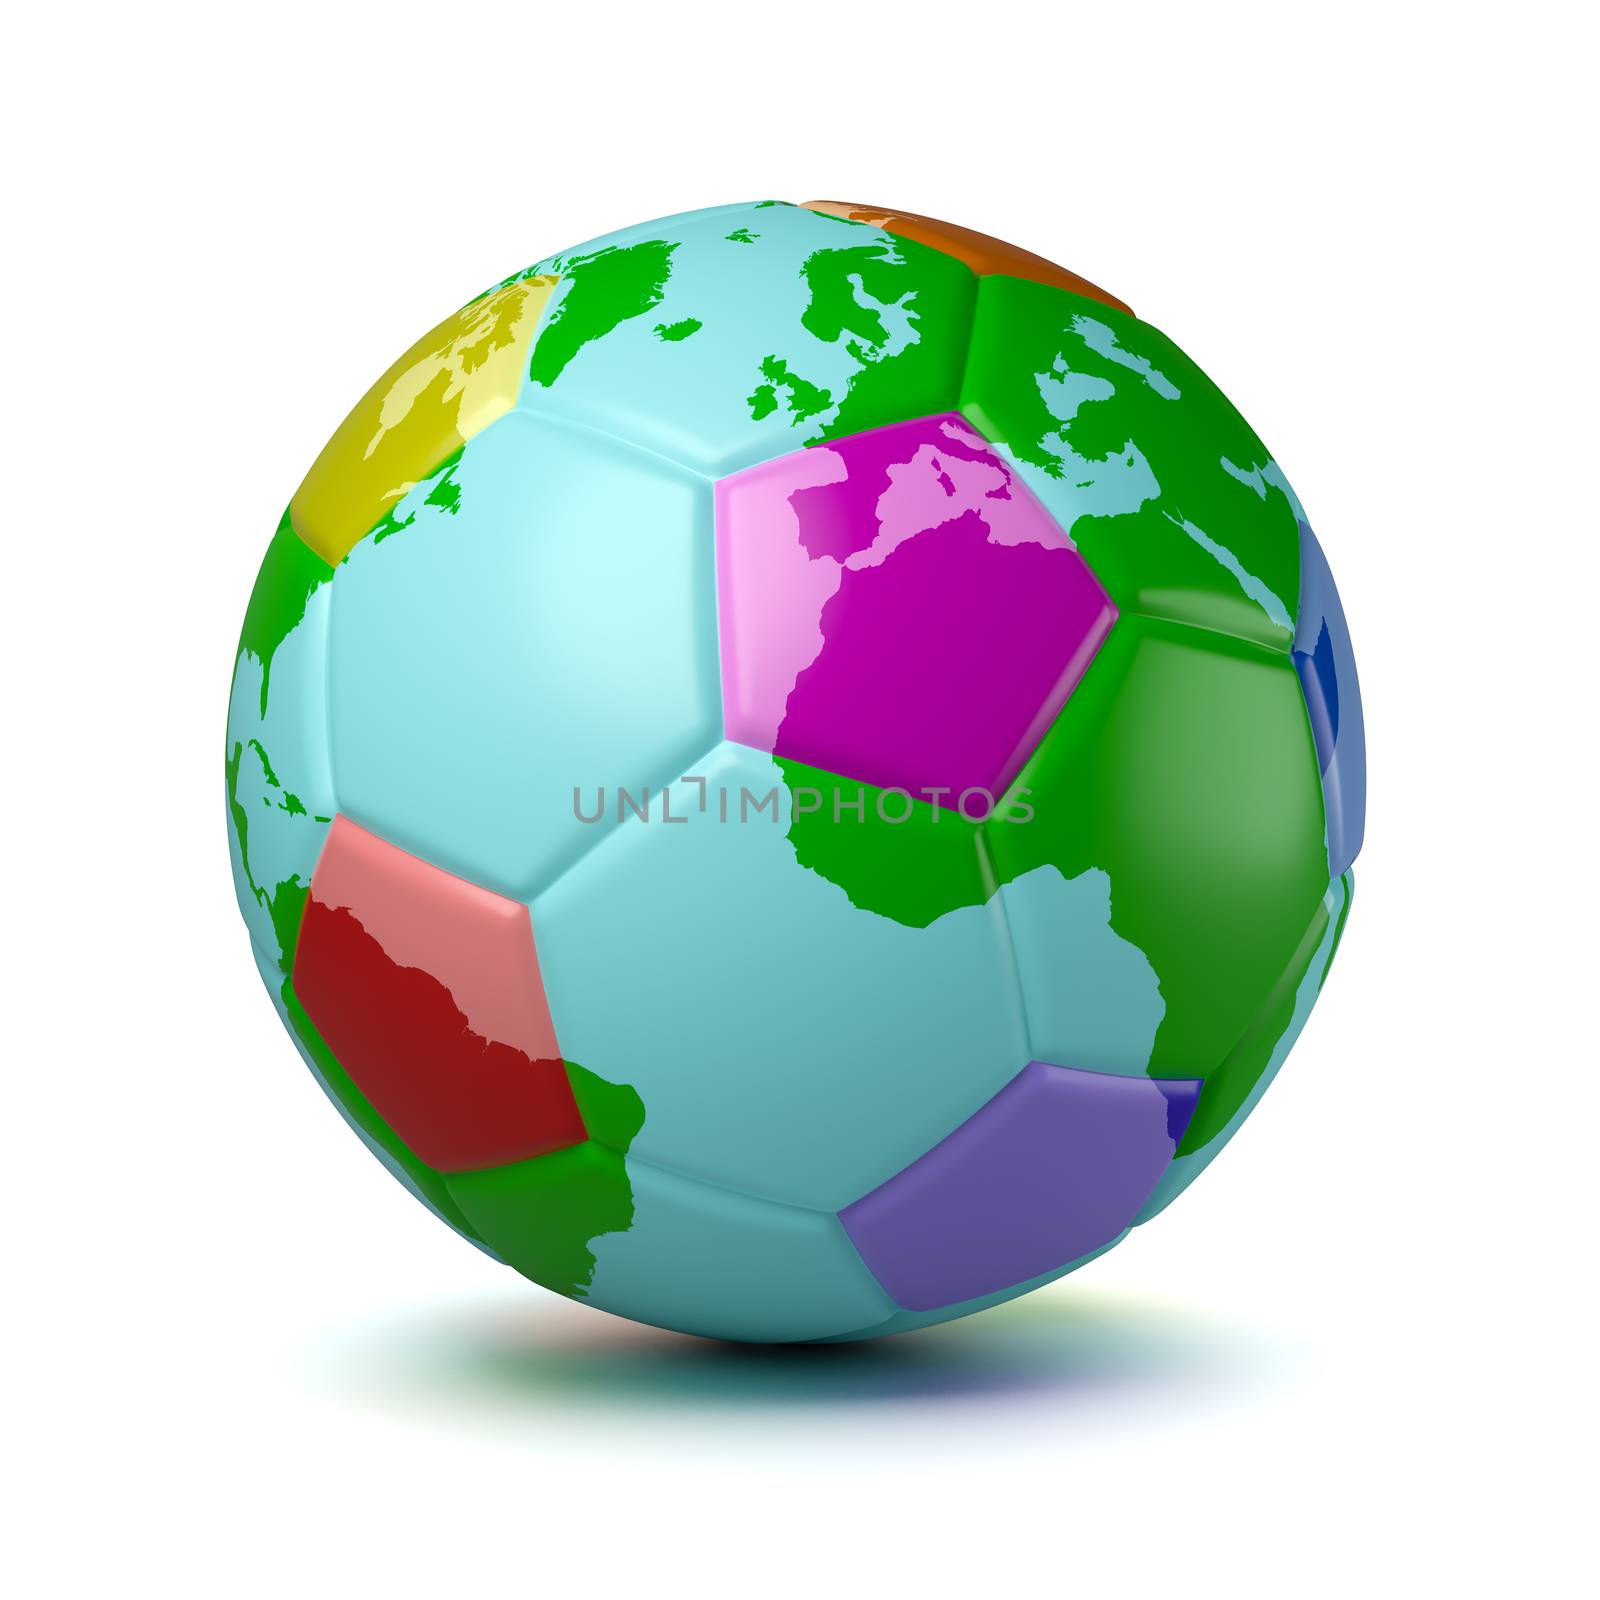 Colorful Soccerball with World Map 3D Illustration on White Background